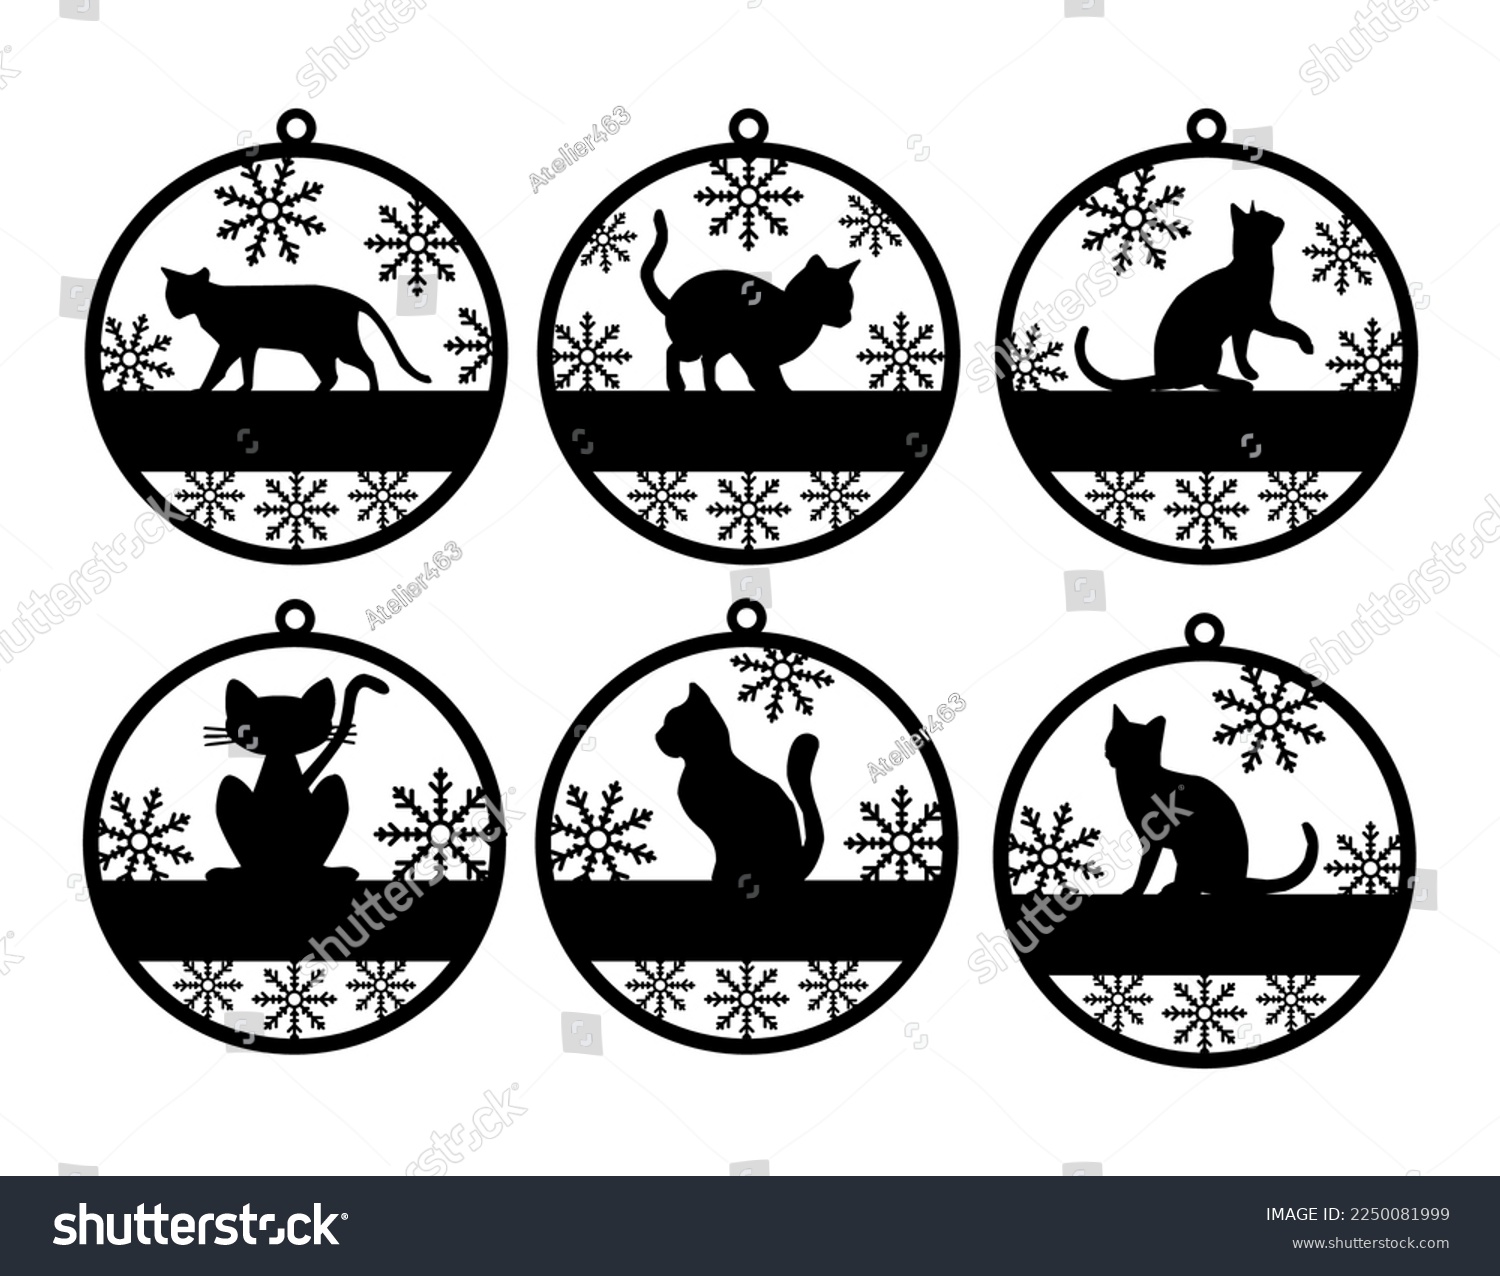 SVG of Christmas Ornaments Cat Vector for Laser Cut Files. svg